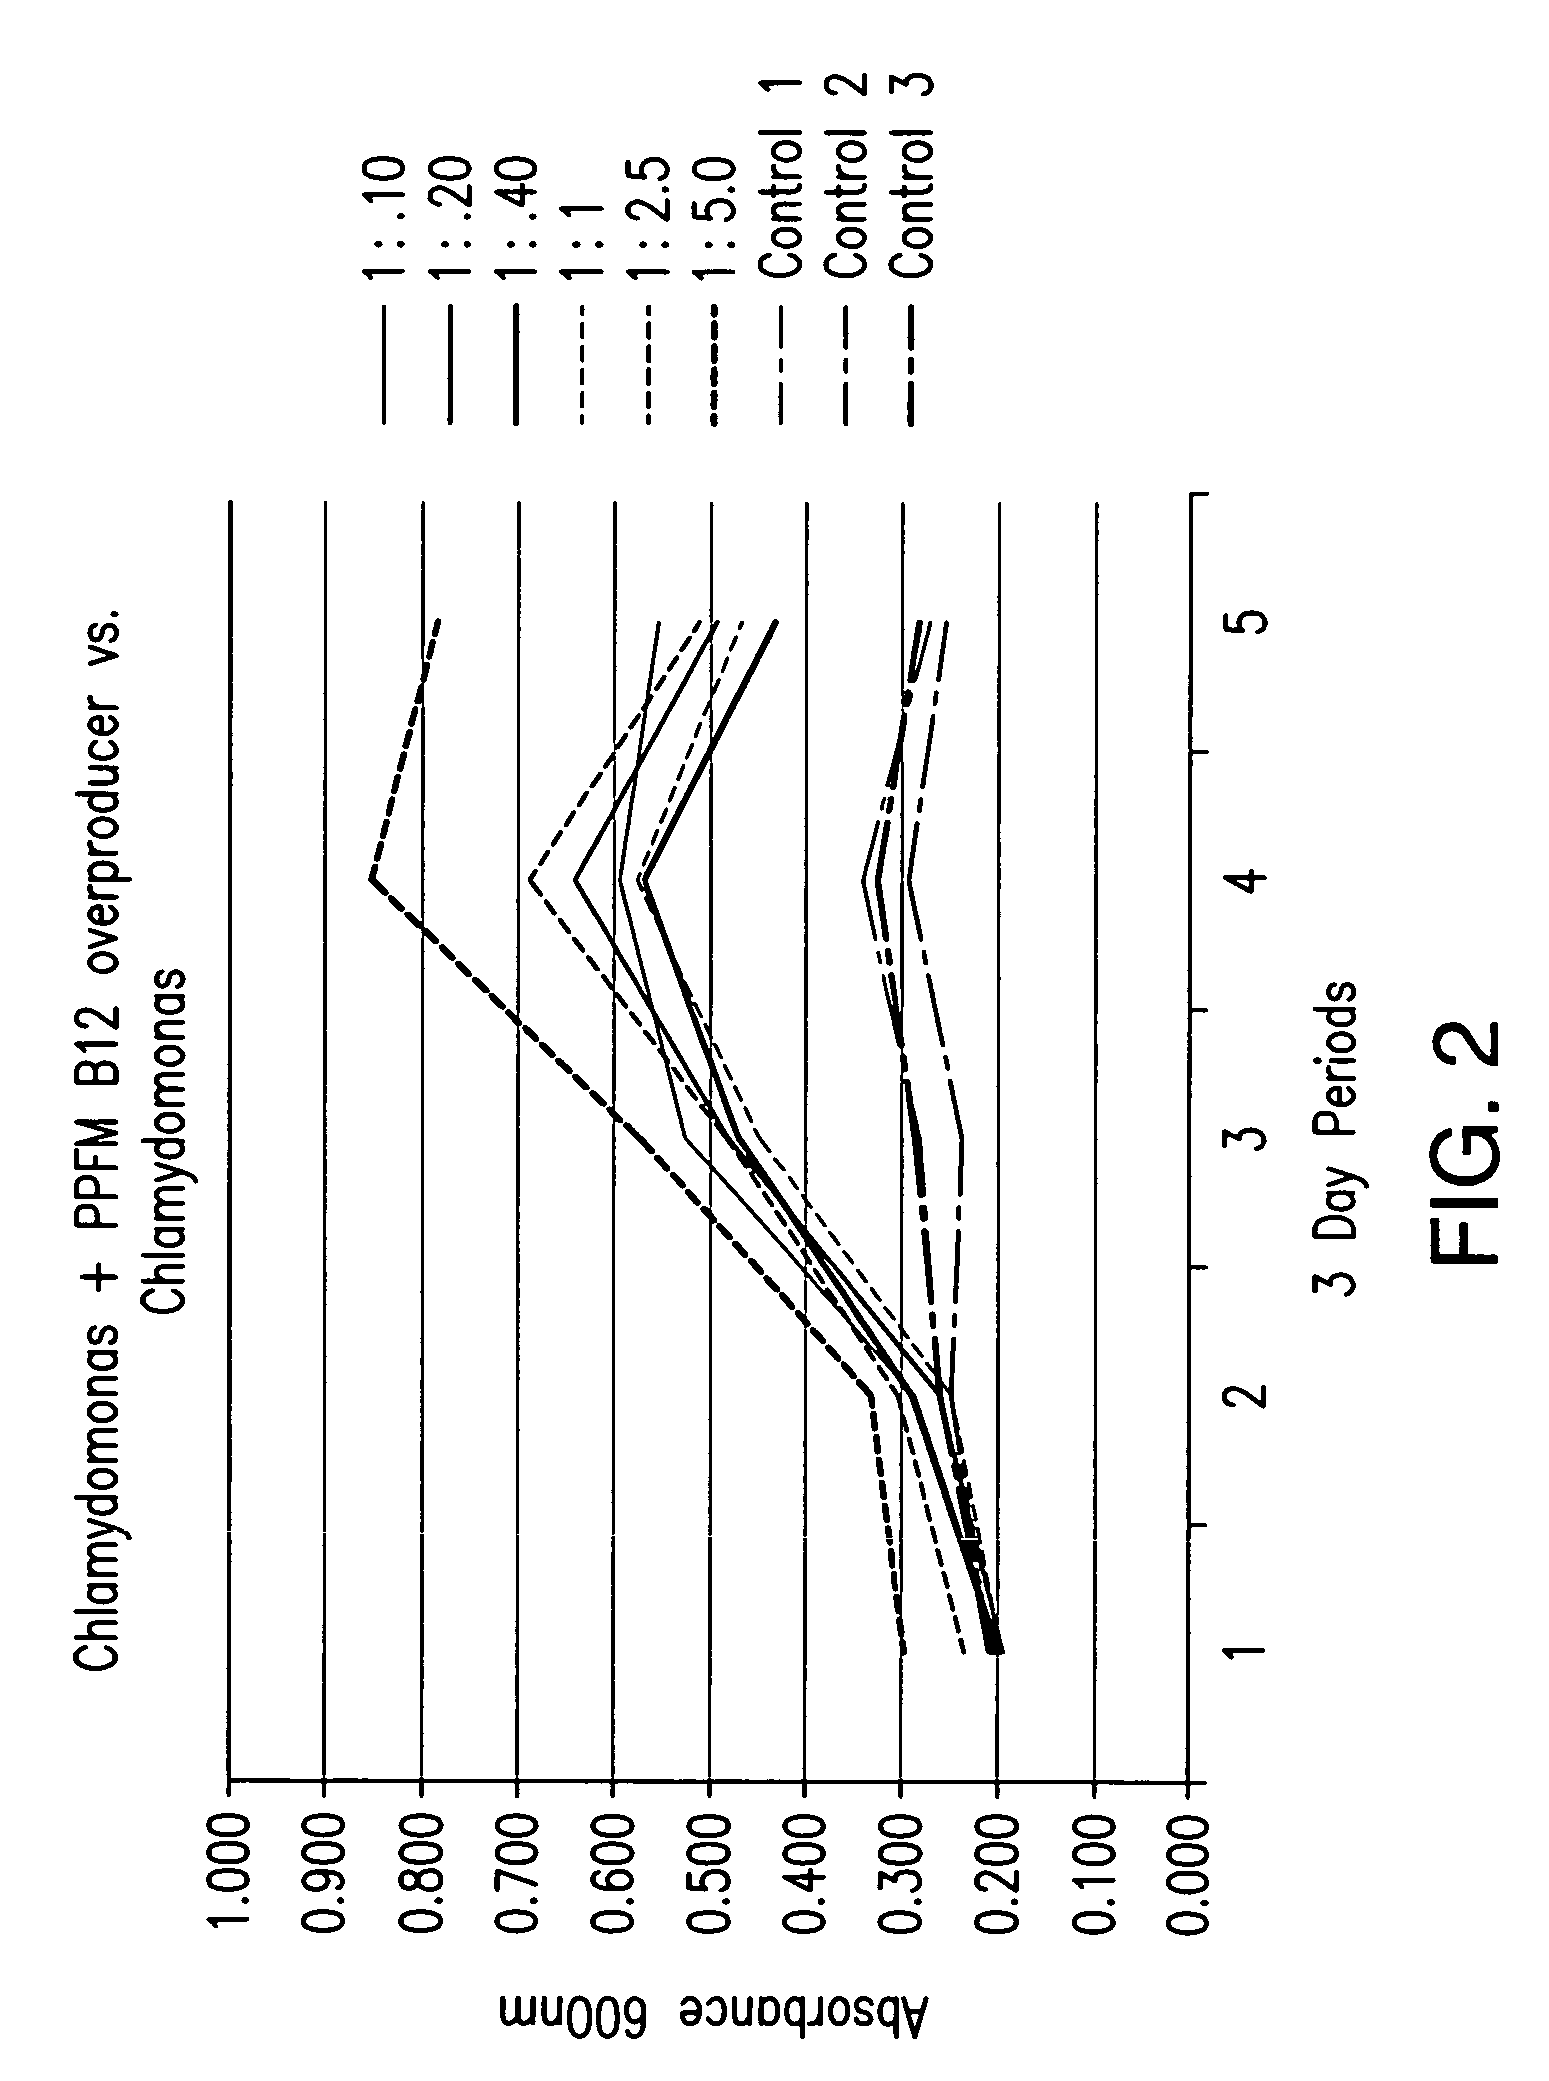 Method for increasing algae growth and the use thereof in production of algae-derived biofuels and other chemical